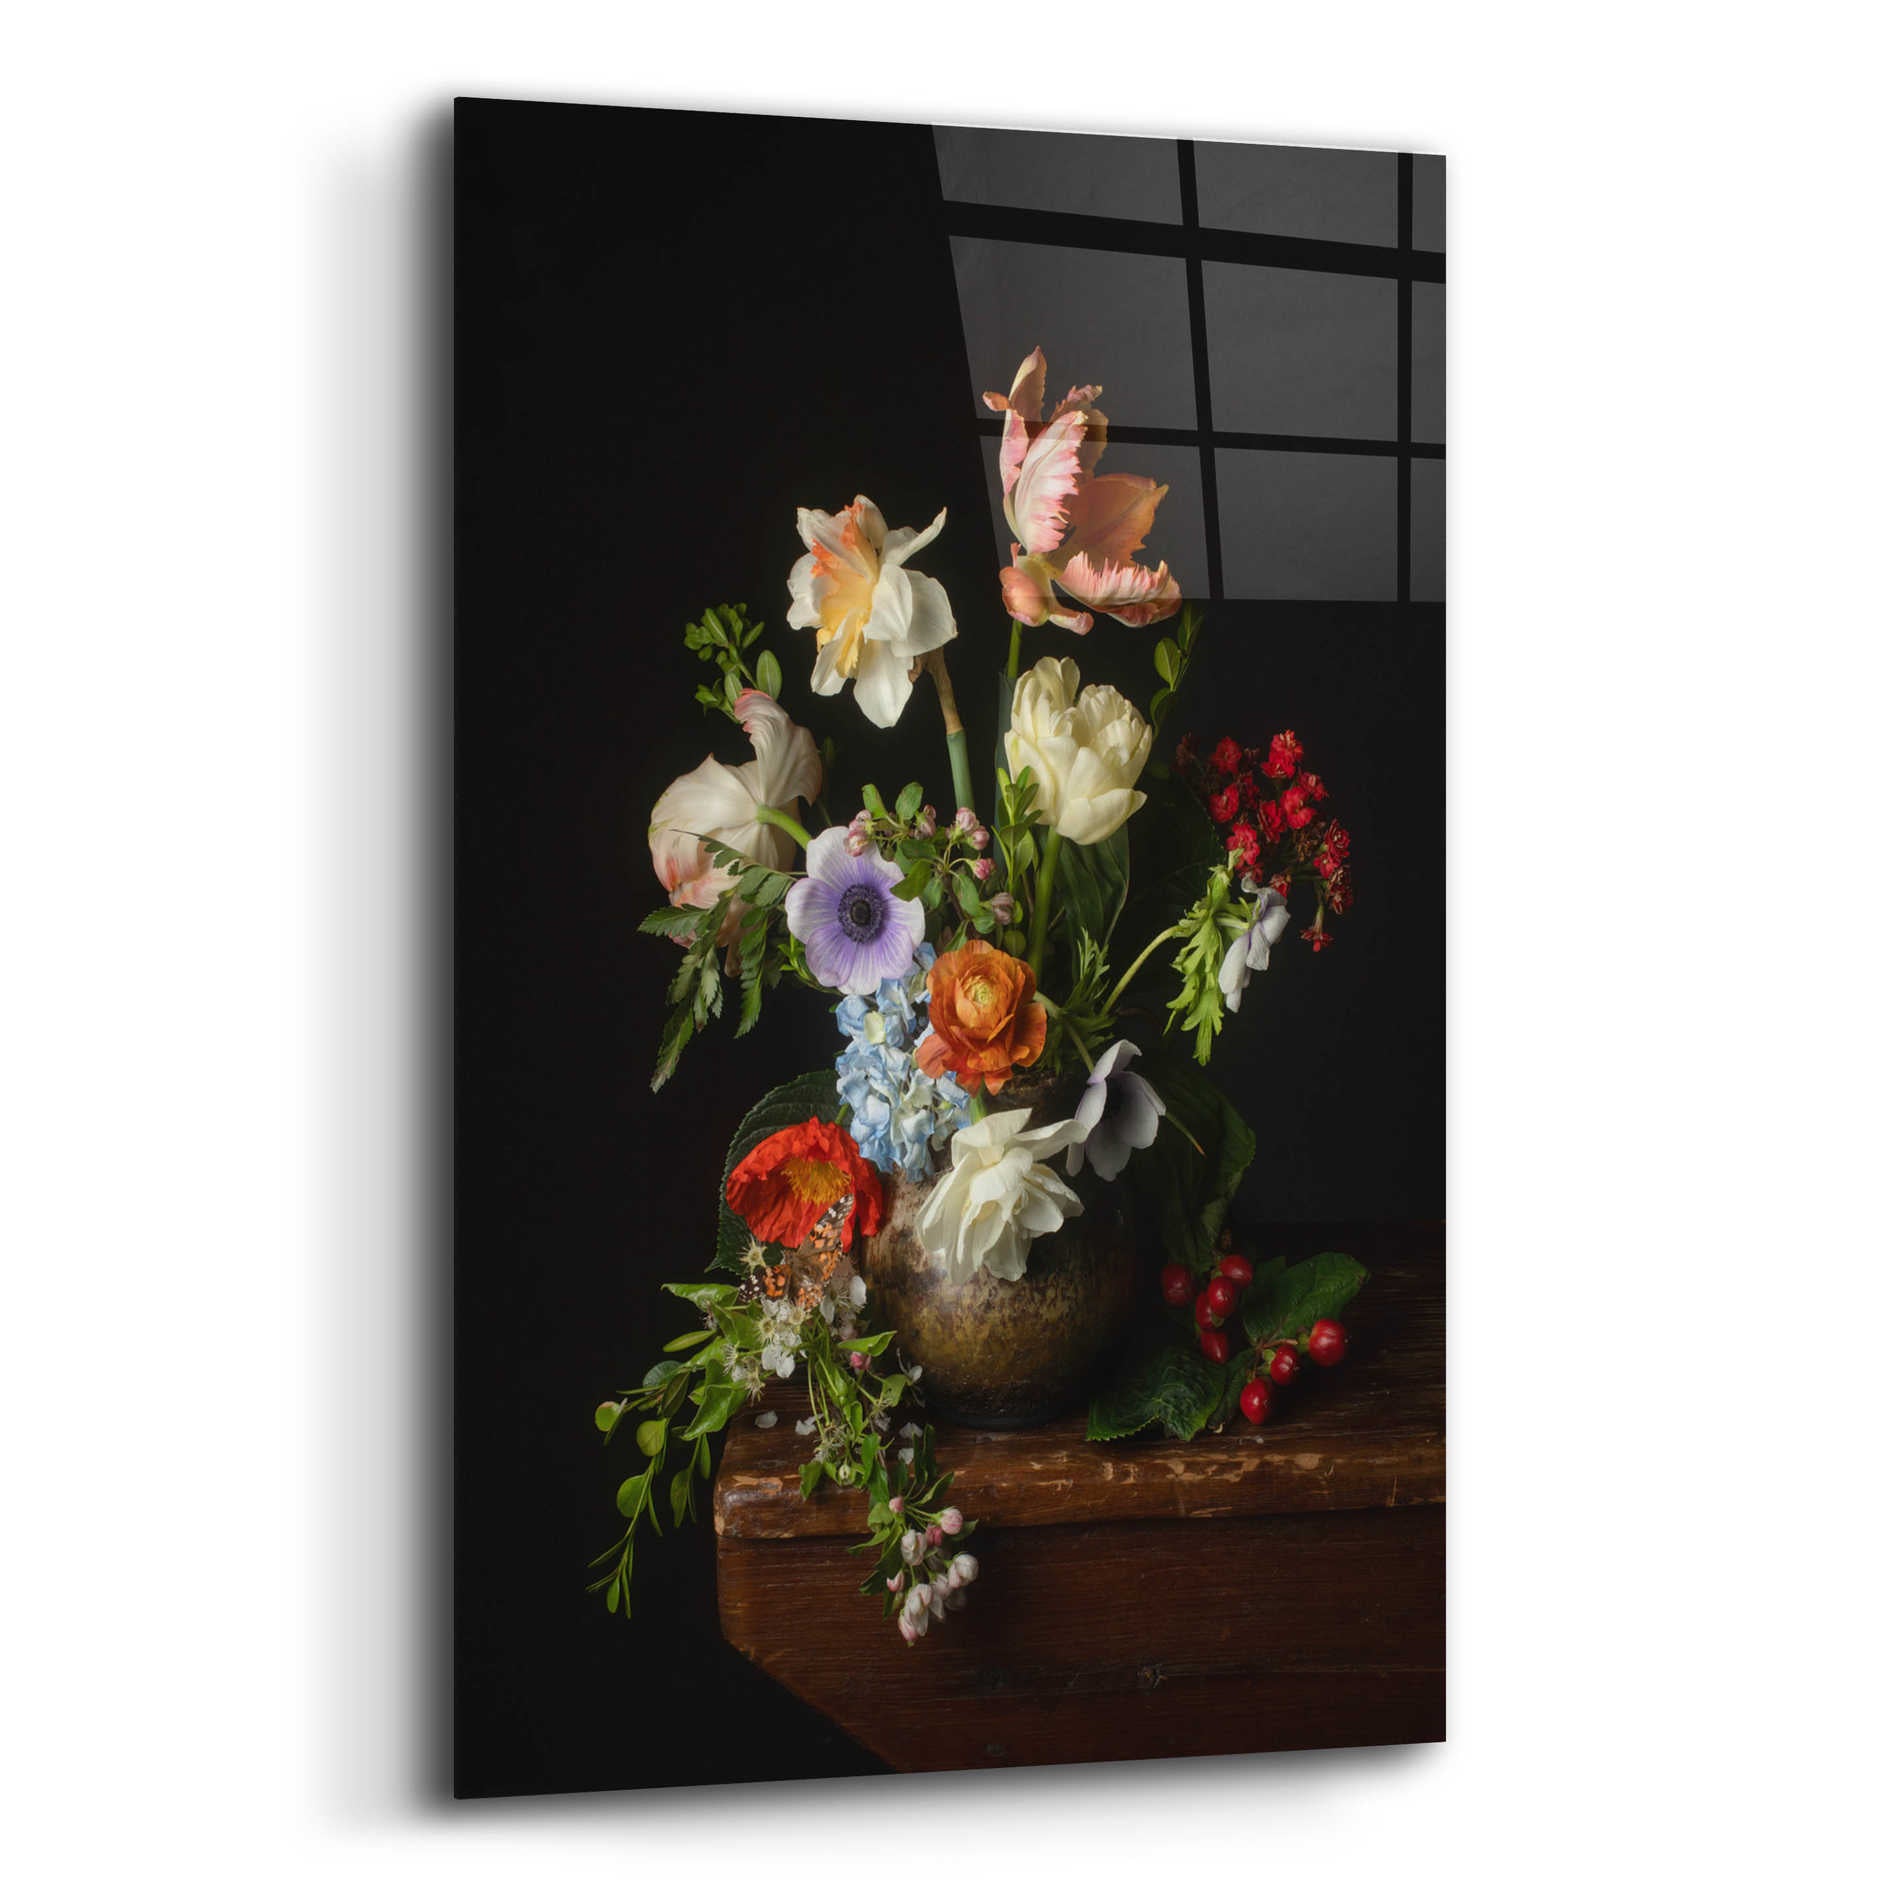 Epic Art 'A Bounty Of Spring Blooms' by Leah McLean Acrylic Glass Wall Art,16x24